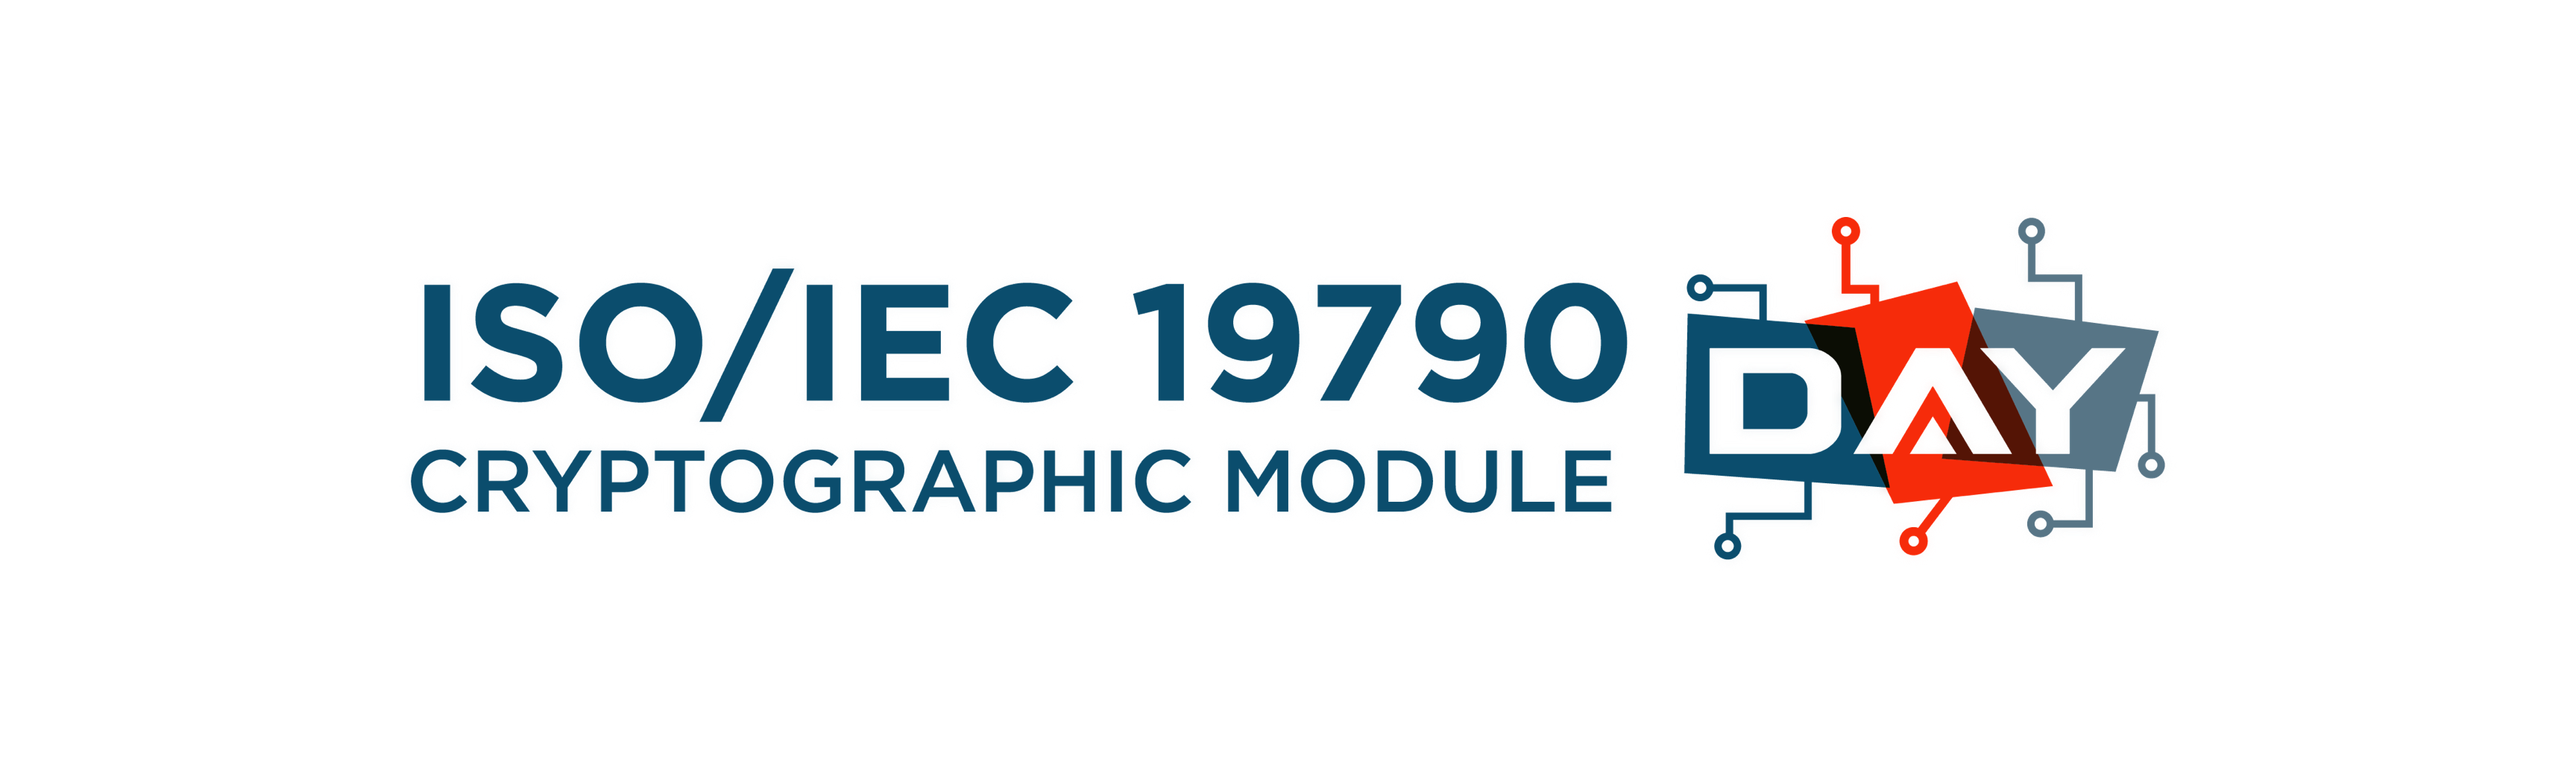 ISO/IEC 19790 Conference – Conference on ISO/IEC 19790 Security  Requirements for Cryptographic Modules